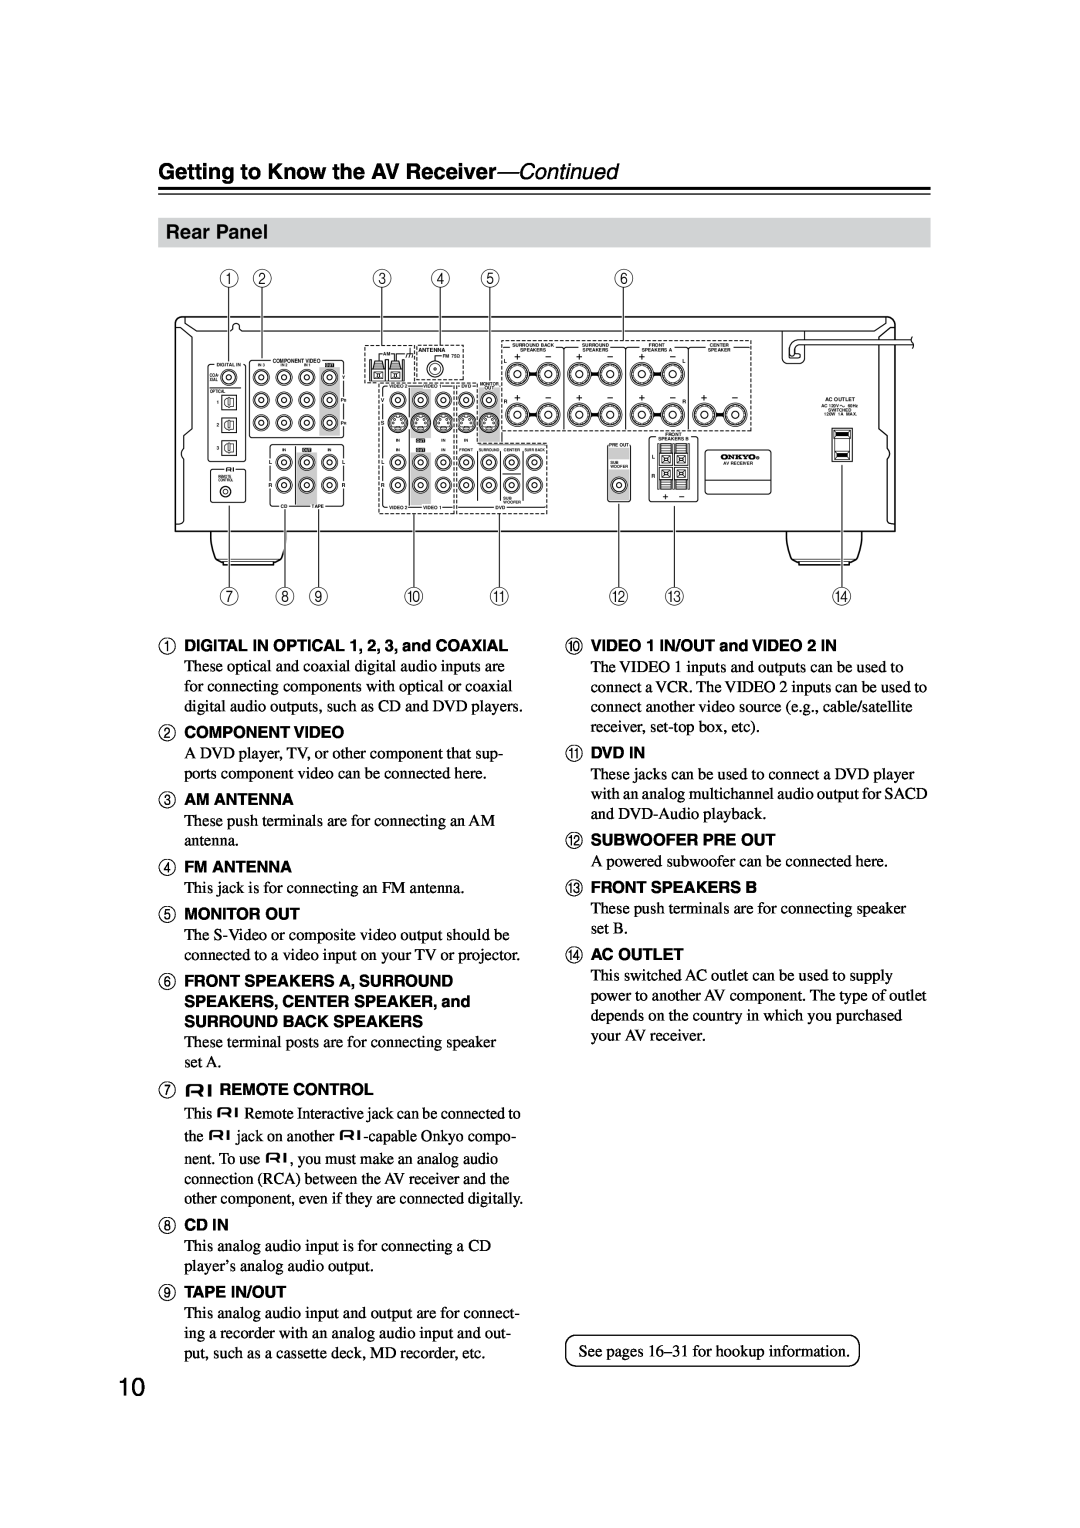 Onkyo TX-SR574 instruction manual Rear Panel, Getting to Know the AV Receiver-Continued 